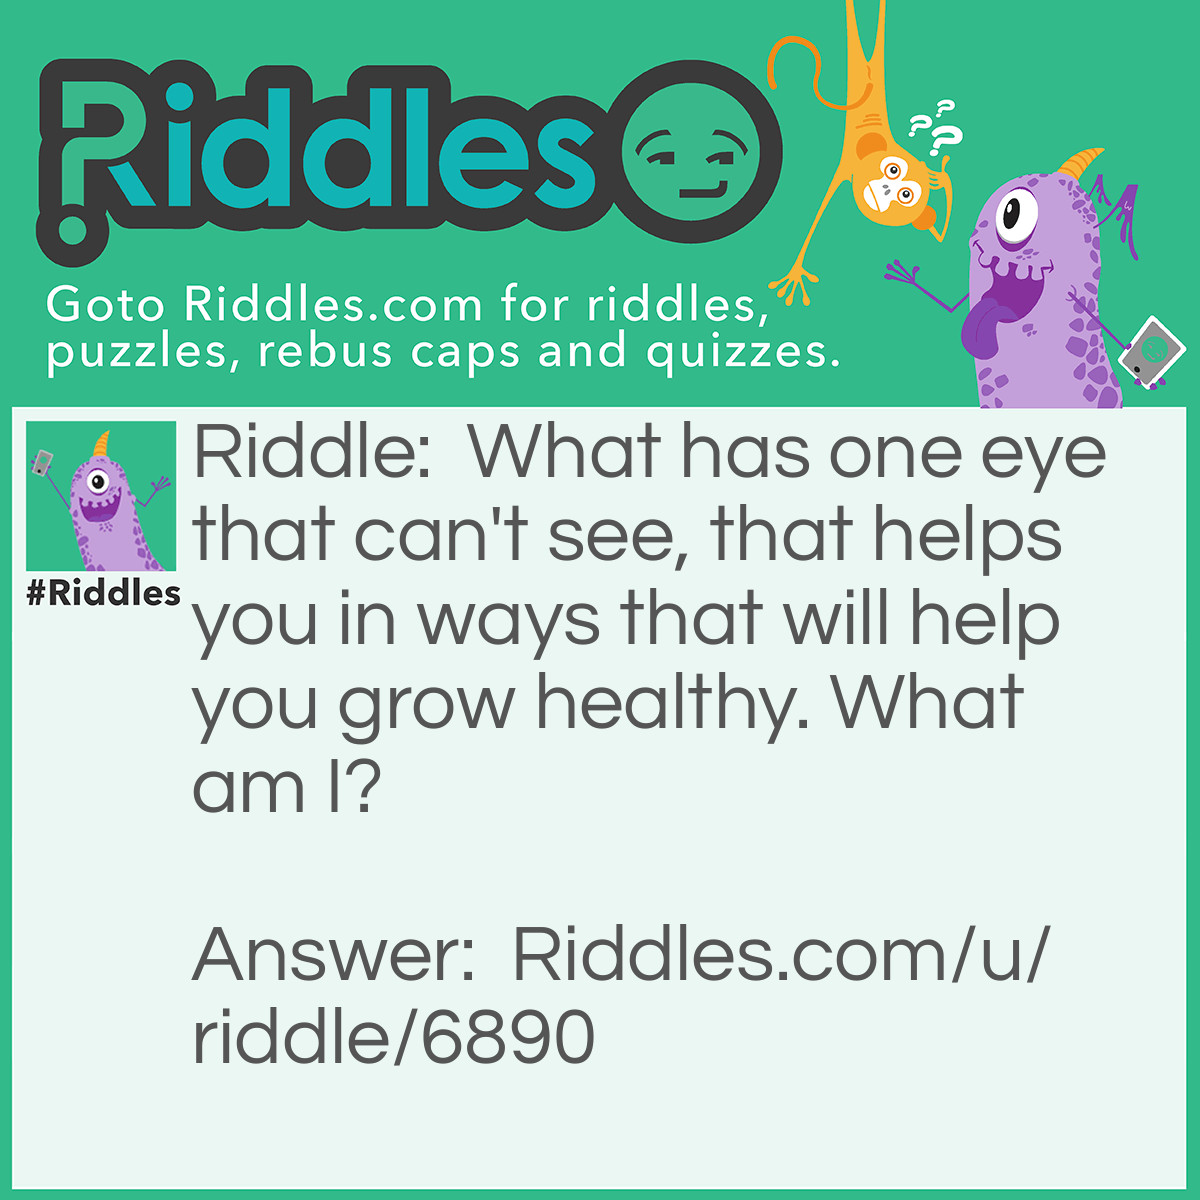 Riddle: What has one eye that can't see, that helps you in ways that will help you grow healthy. What am I? Answer: Black eyed pea.